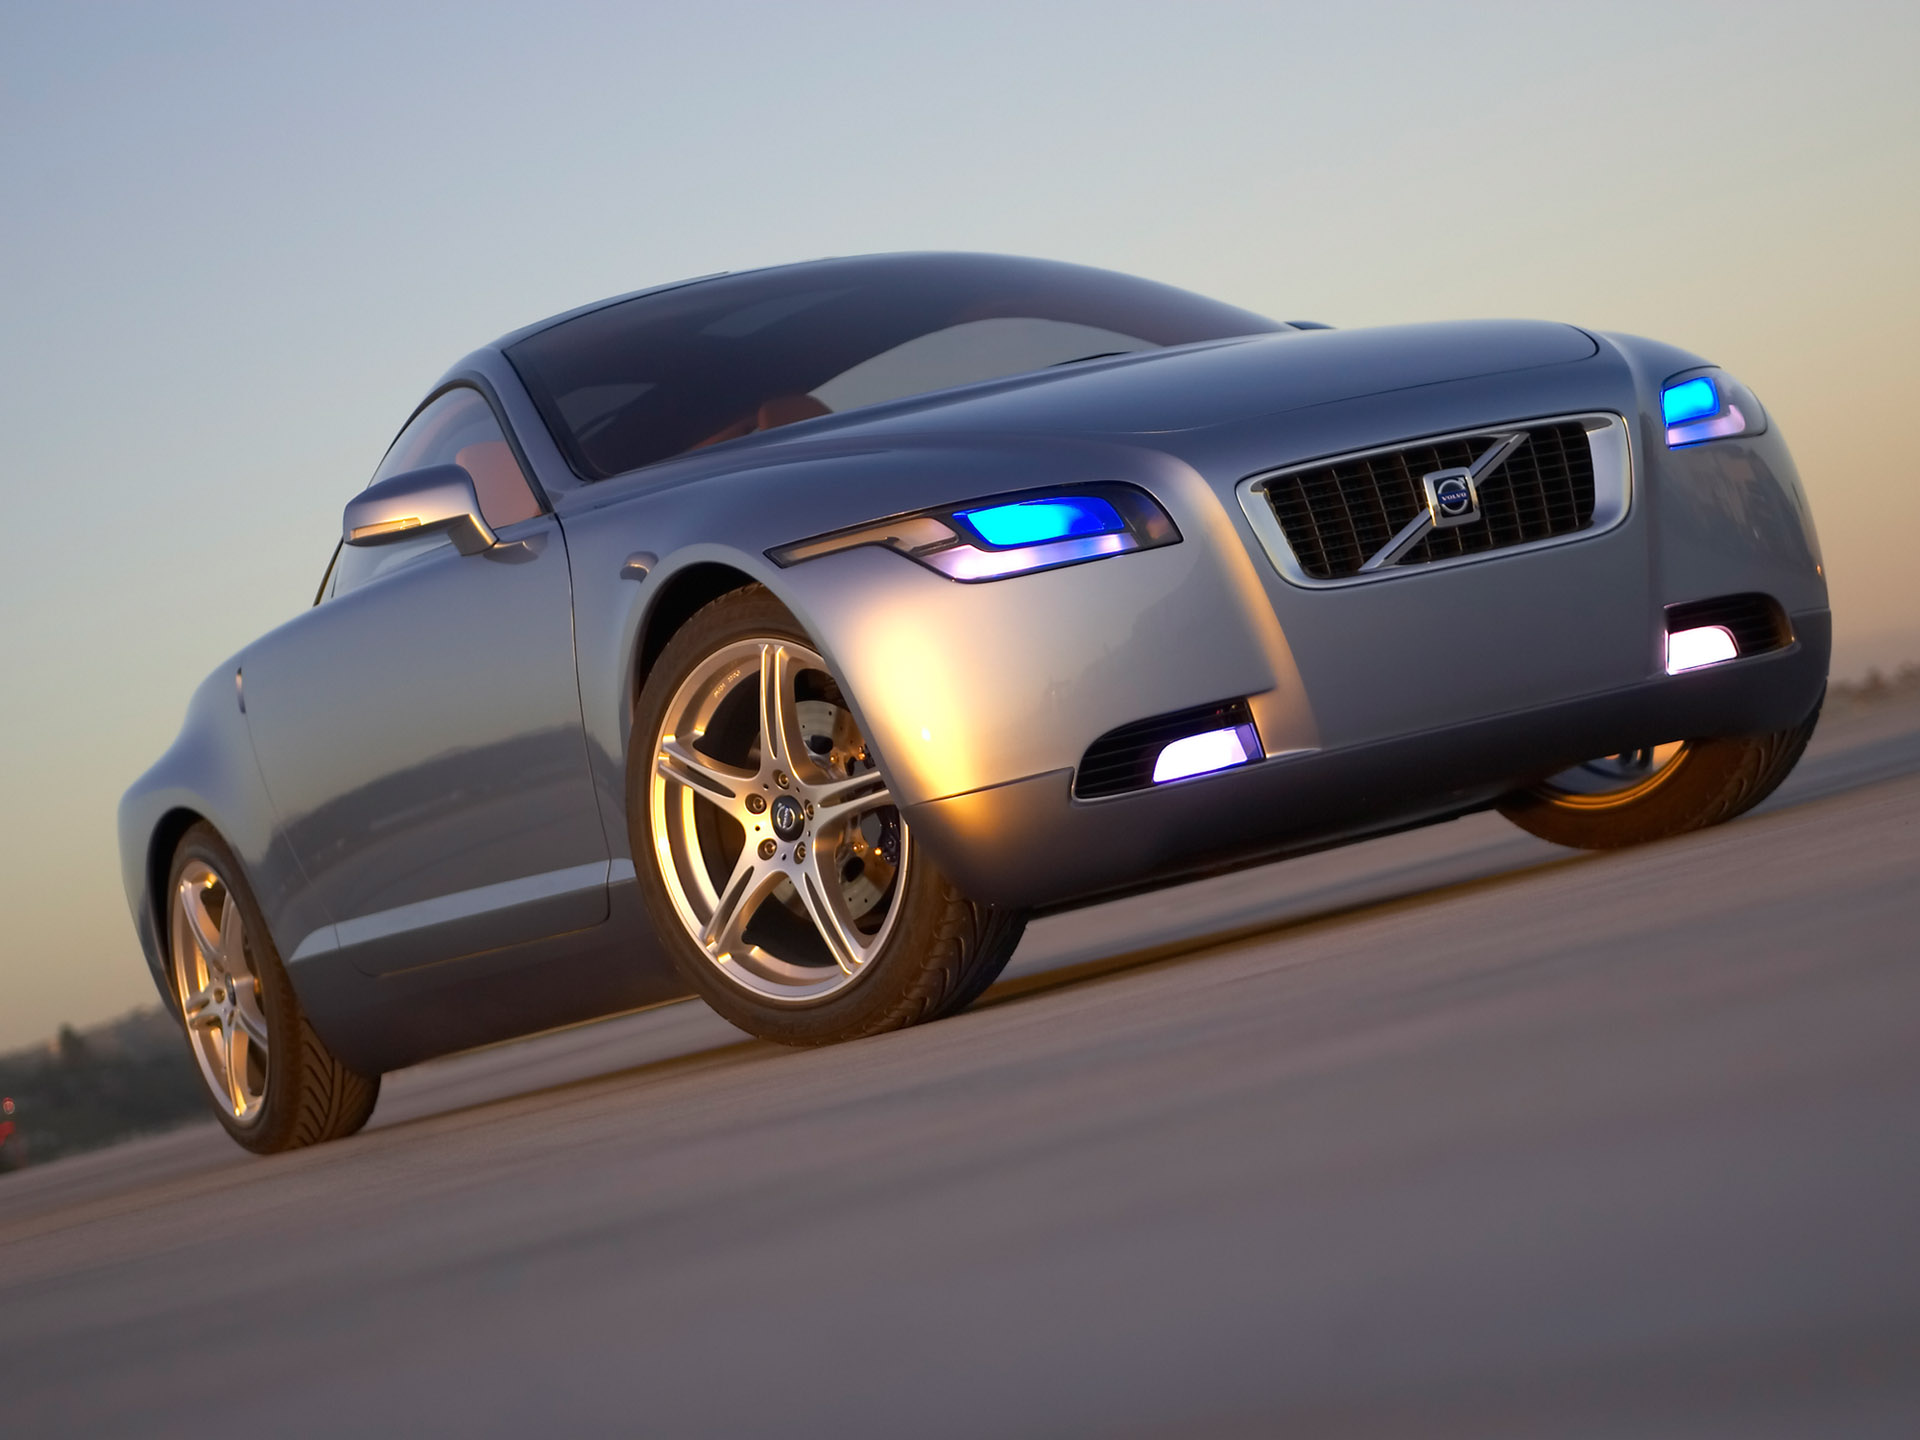 2004 Volvo 3CC Concept - Front Angle - Sunset - 1920x1440 Wallpaper